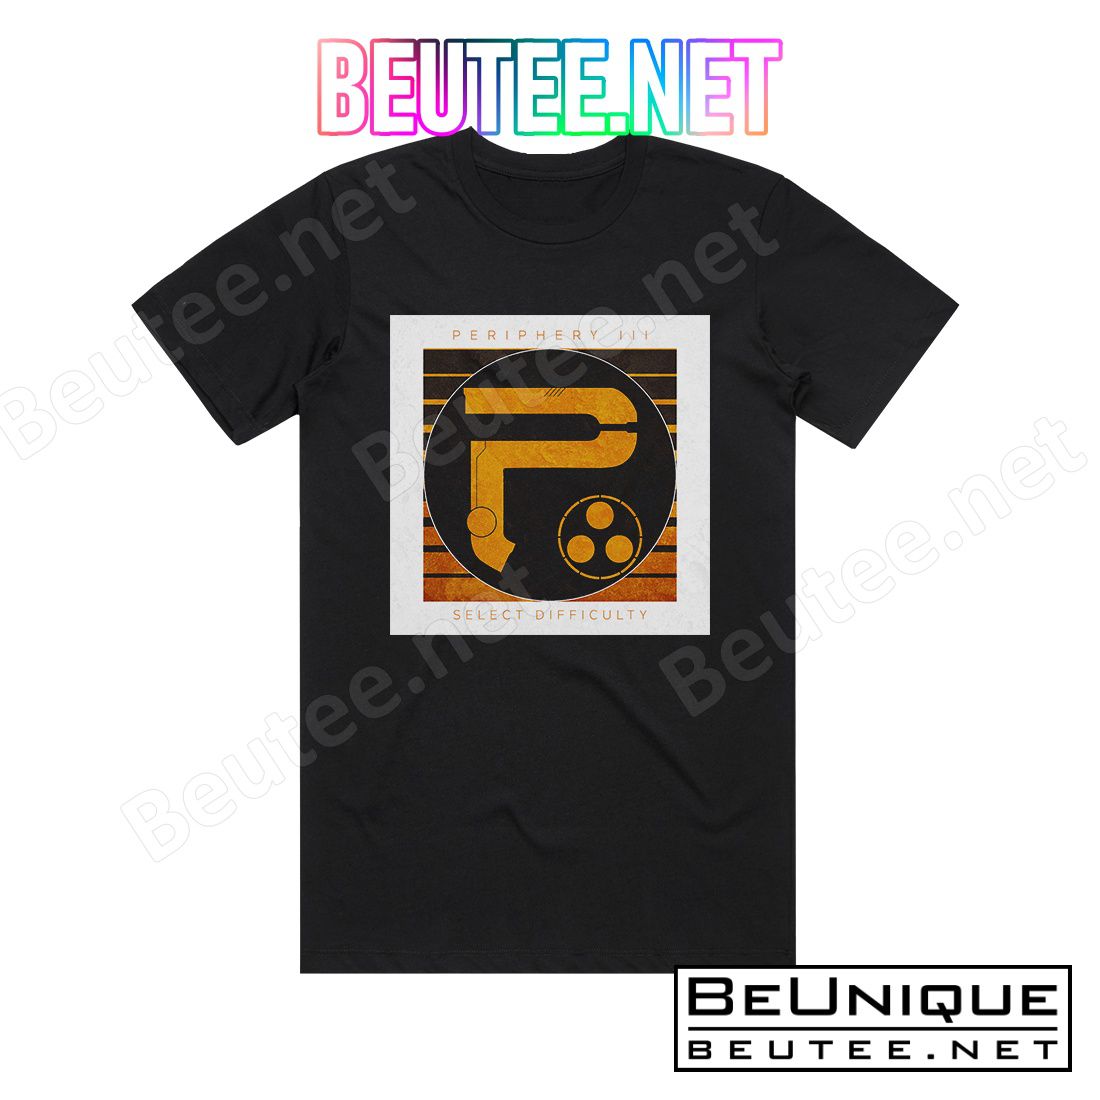 Periphery Periphery Iii Select Difficulty Album Cover T-Shirt